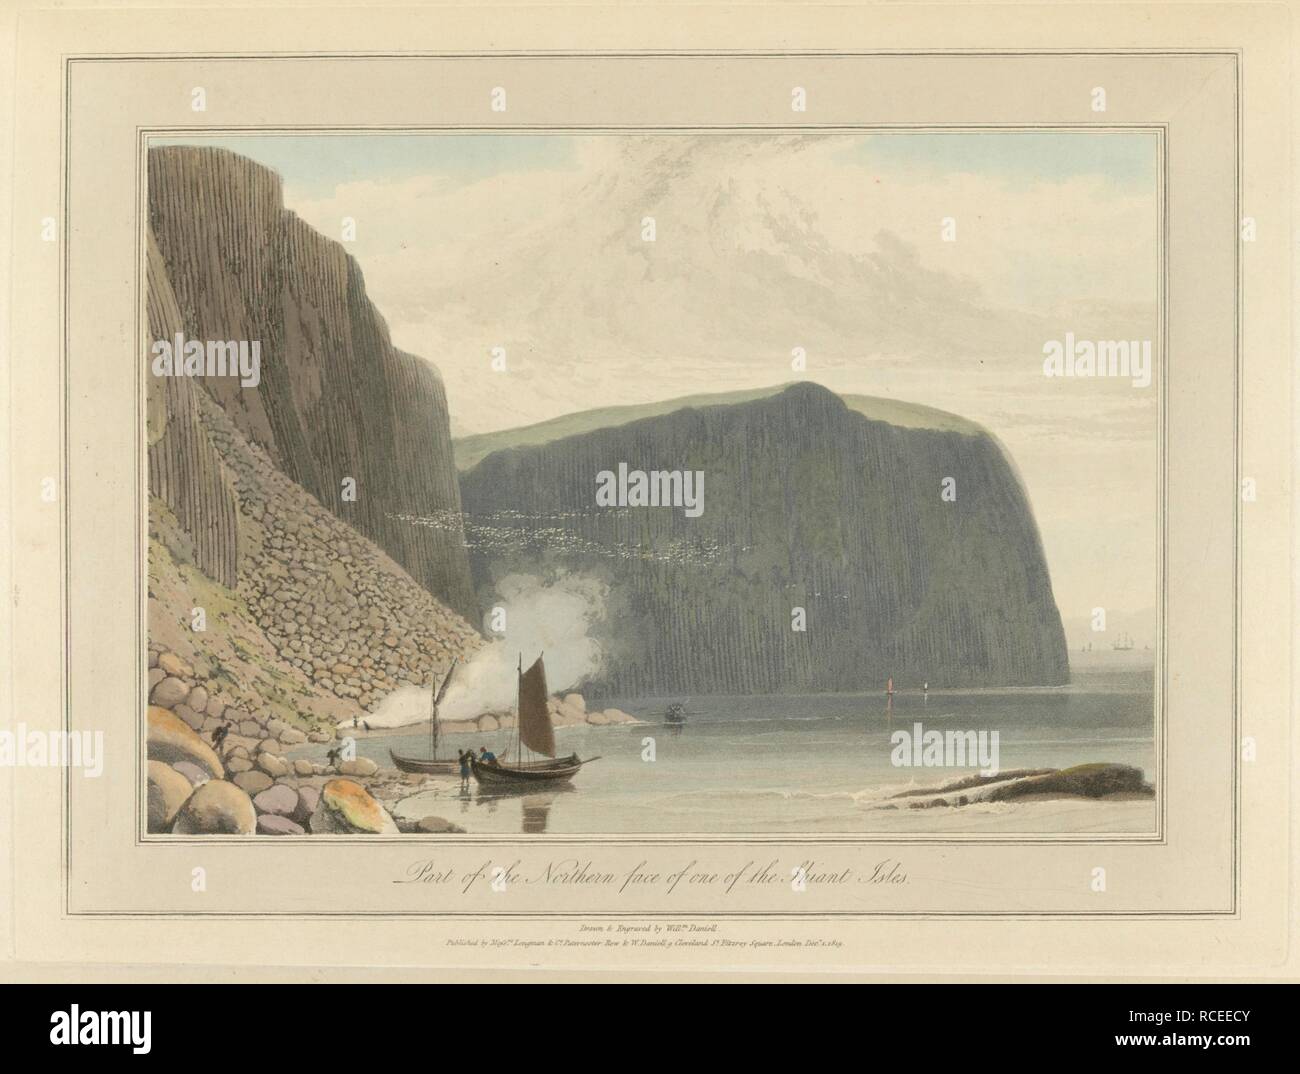 Part of the Northern face of one of the Shiant Isles  Coastal landscape scenes around Great Britain. A Voyage round Great Britain undertaken in the summer of the year 1813. With a series of views illustrative of the character and prominent features of the coast, drawn and engraved by William Daniell. Longman: London, 1814-25. Source: G.7044 plate 117. Language: English. Author: DANIELL, WILLIAM. AYTON, RICHARD. Stock Photo